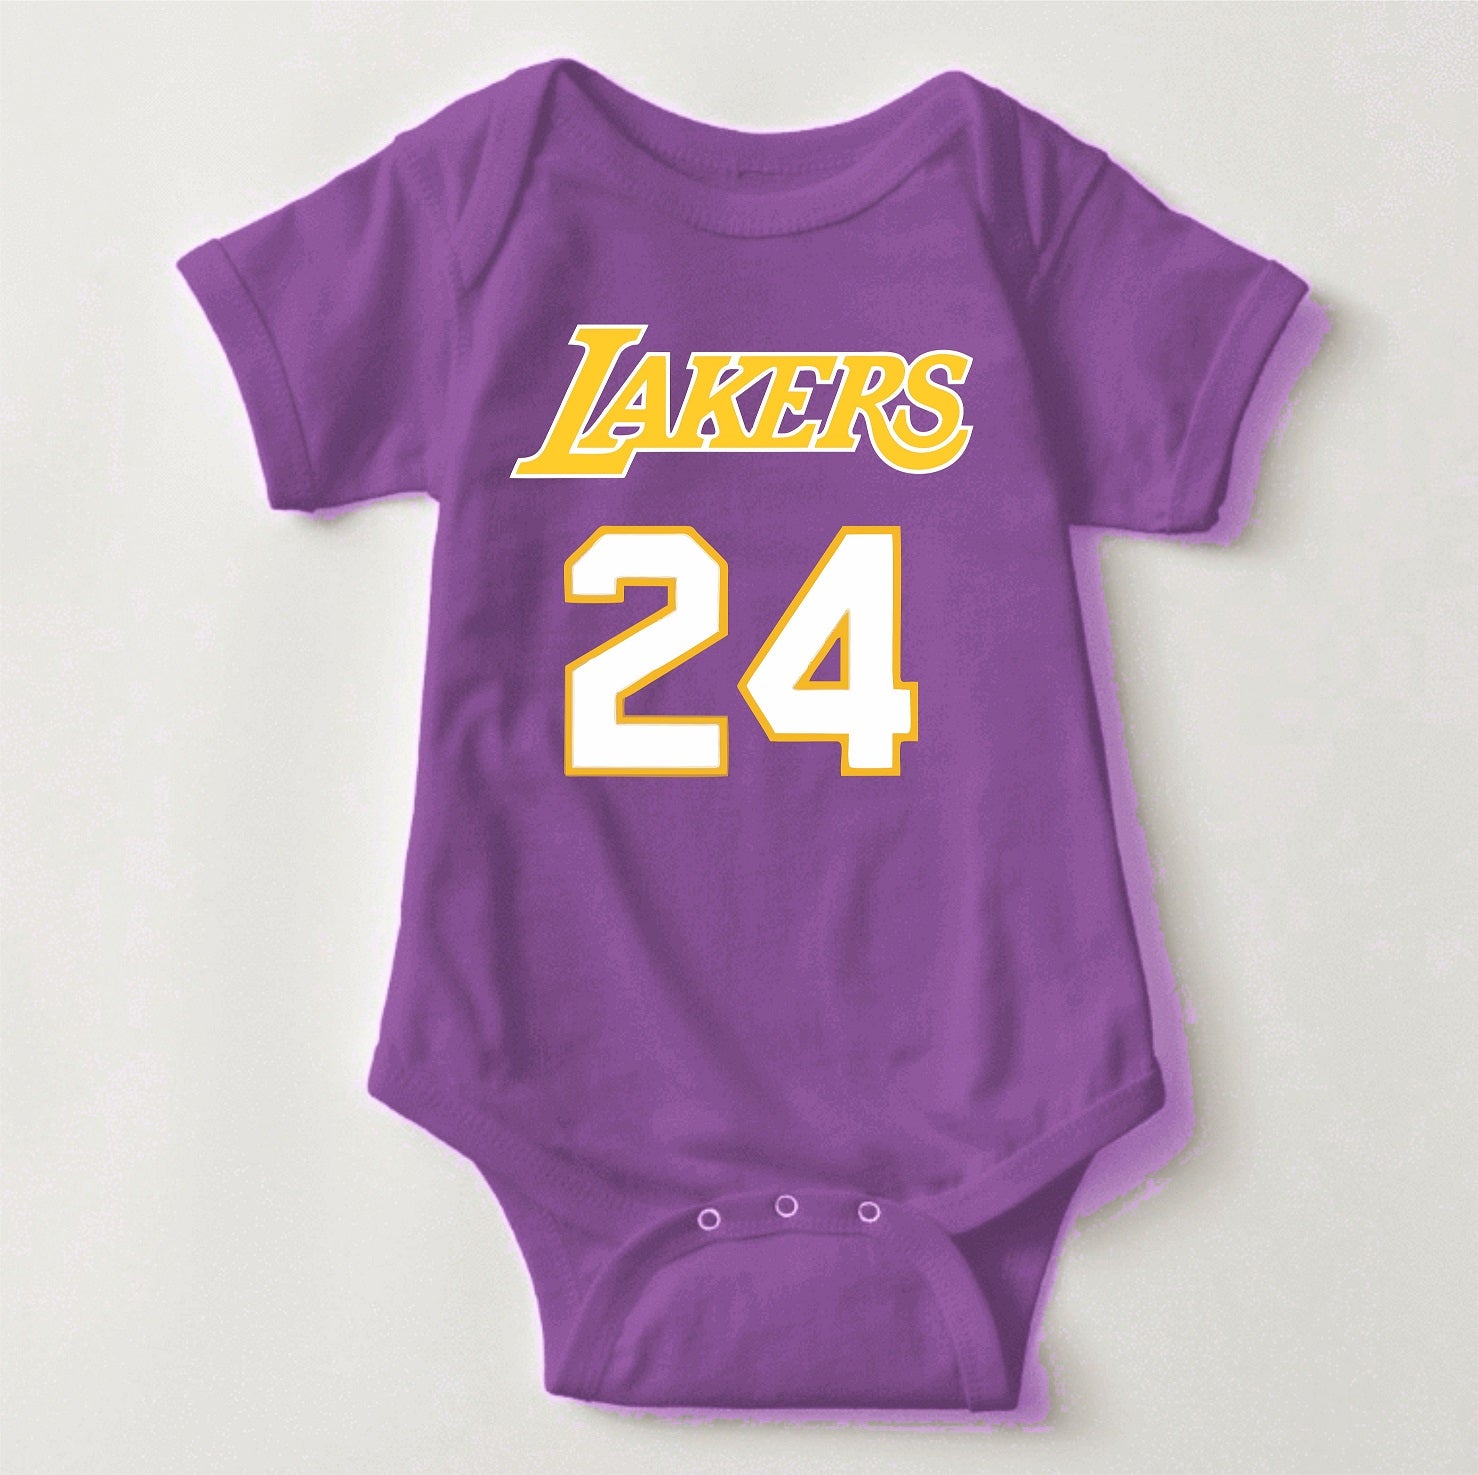 Buy Lakers Baby Boy Jersey online